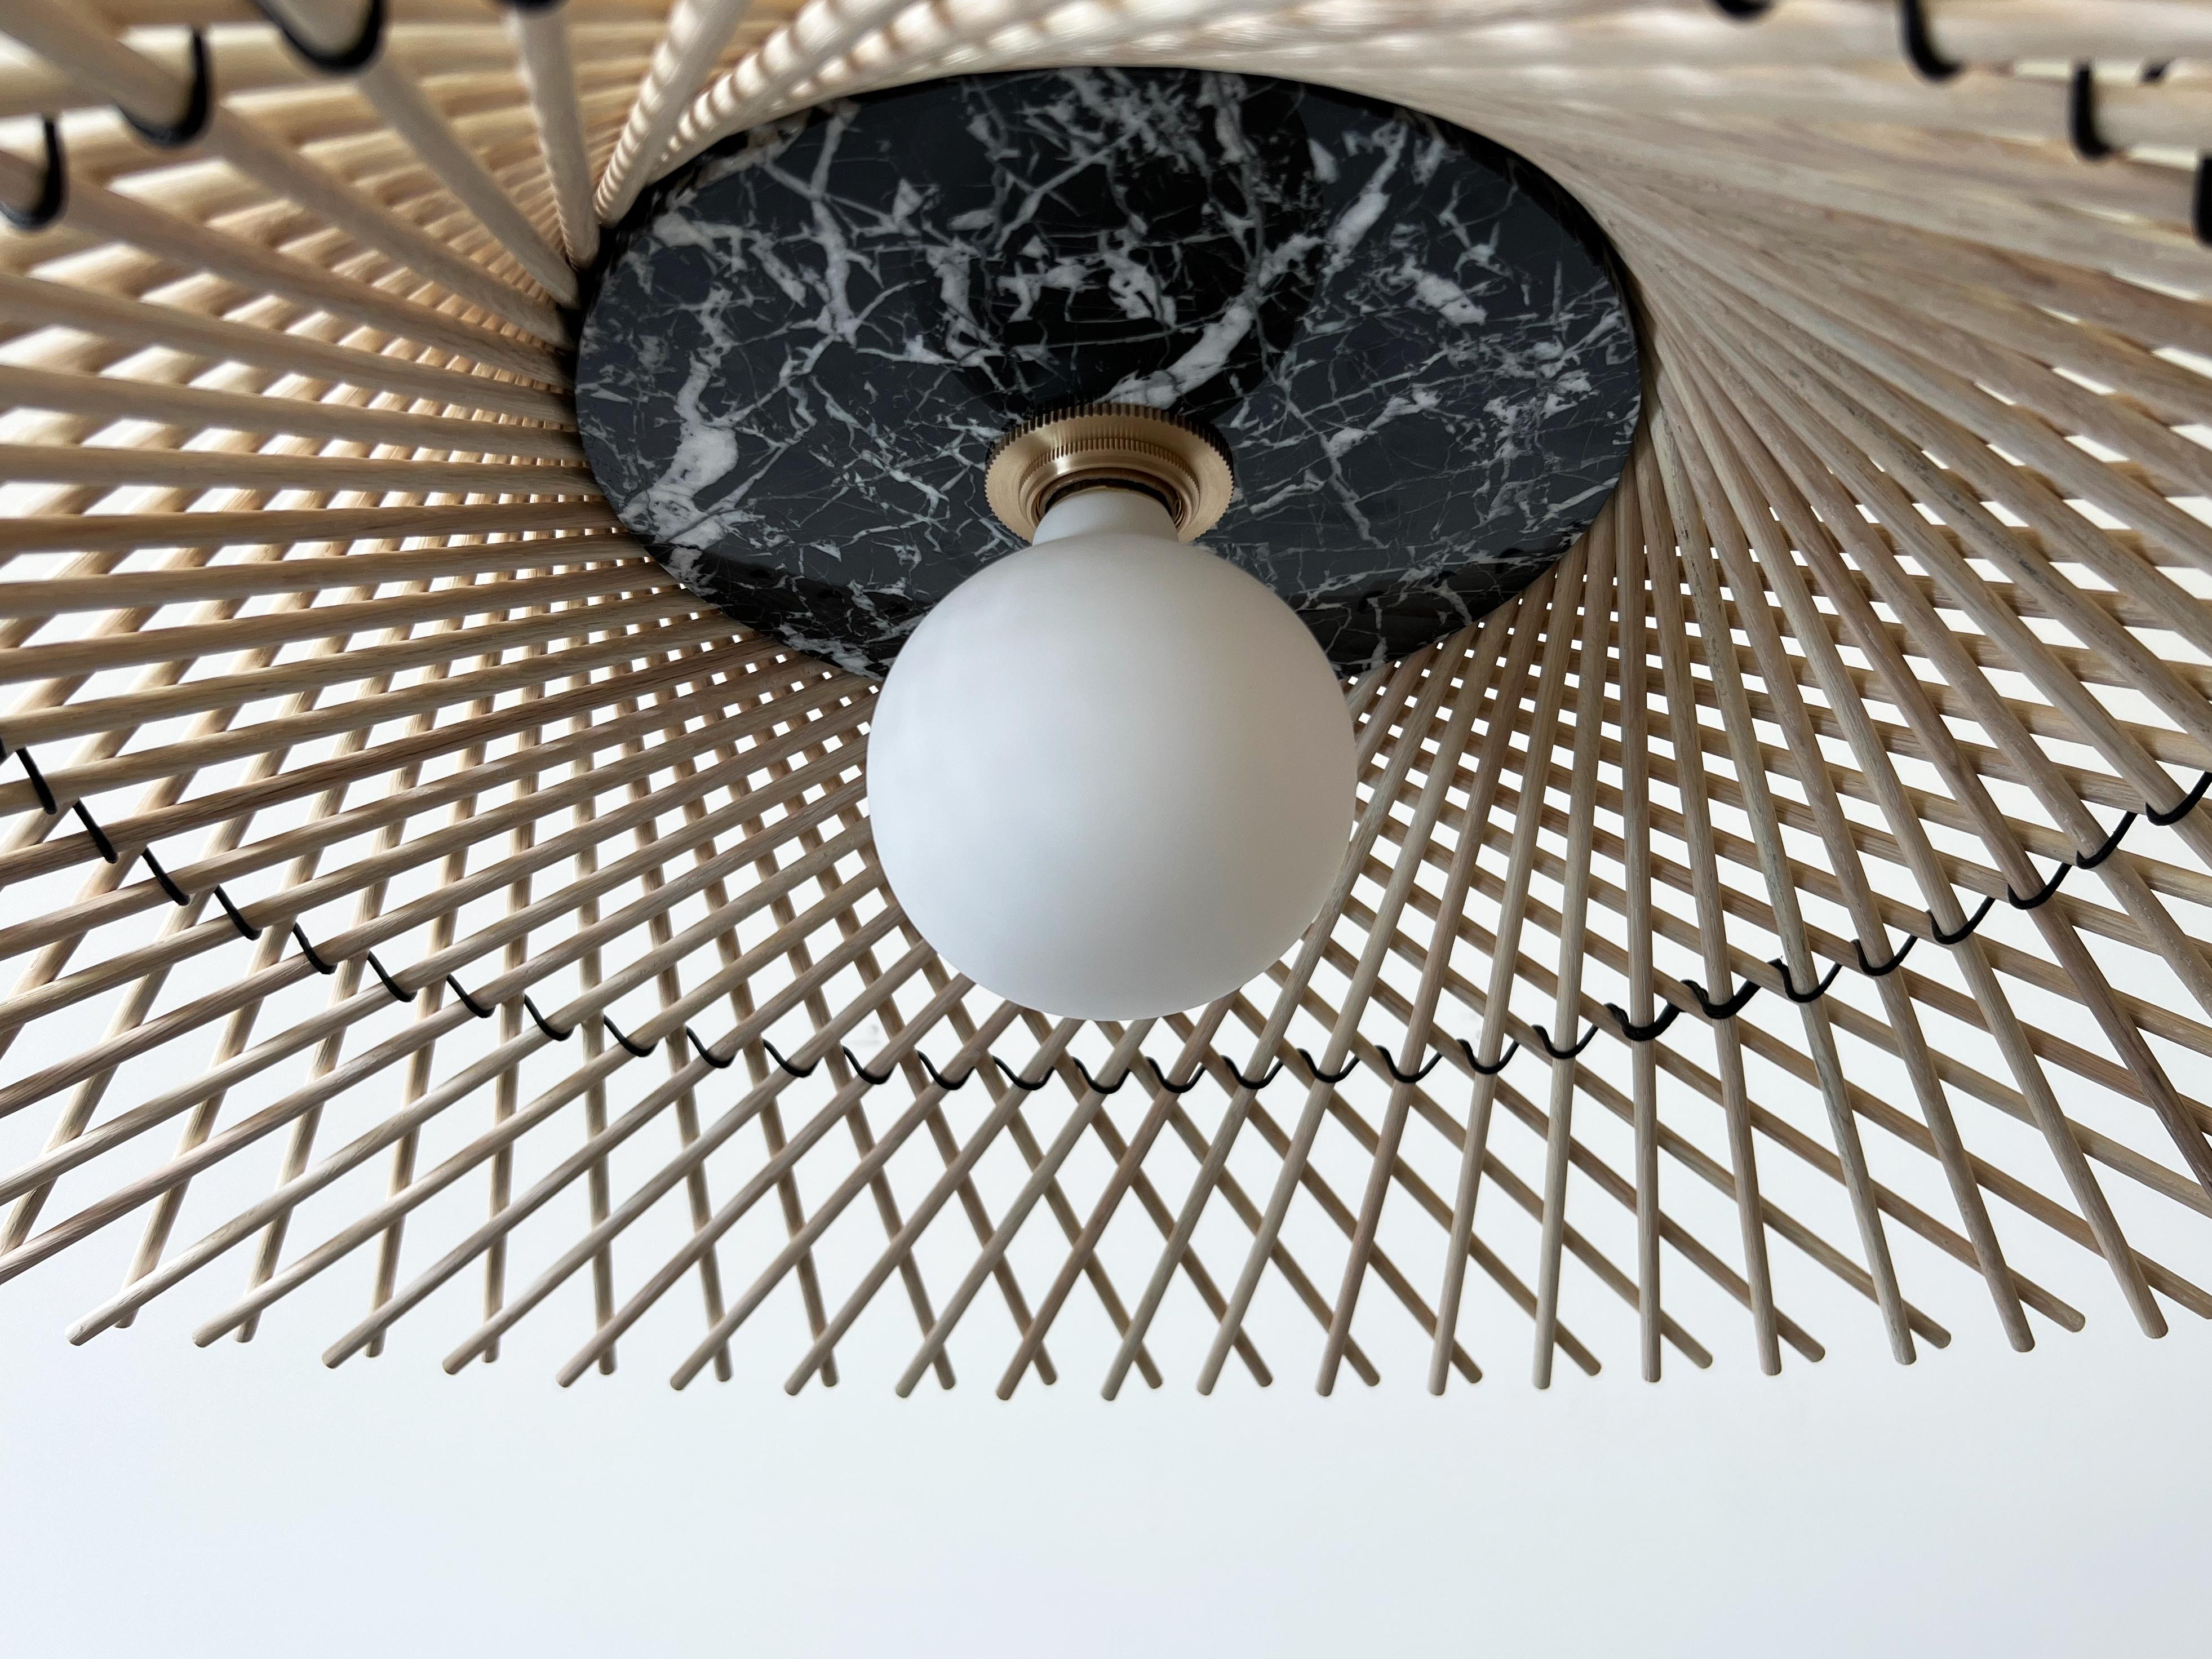 American Mooda Ceiling Pendant 9 / Bleached Oak Wood / Nero Marquina Marble by INDO- For Sale